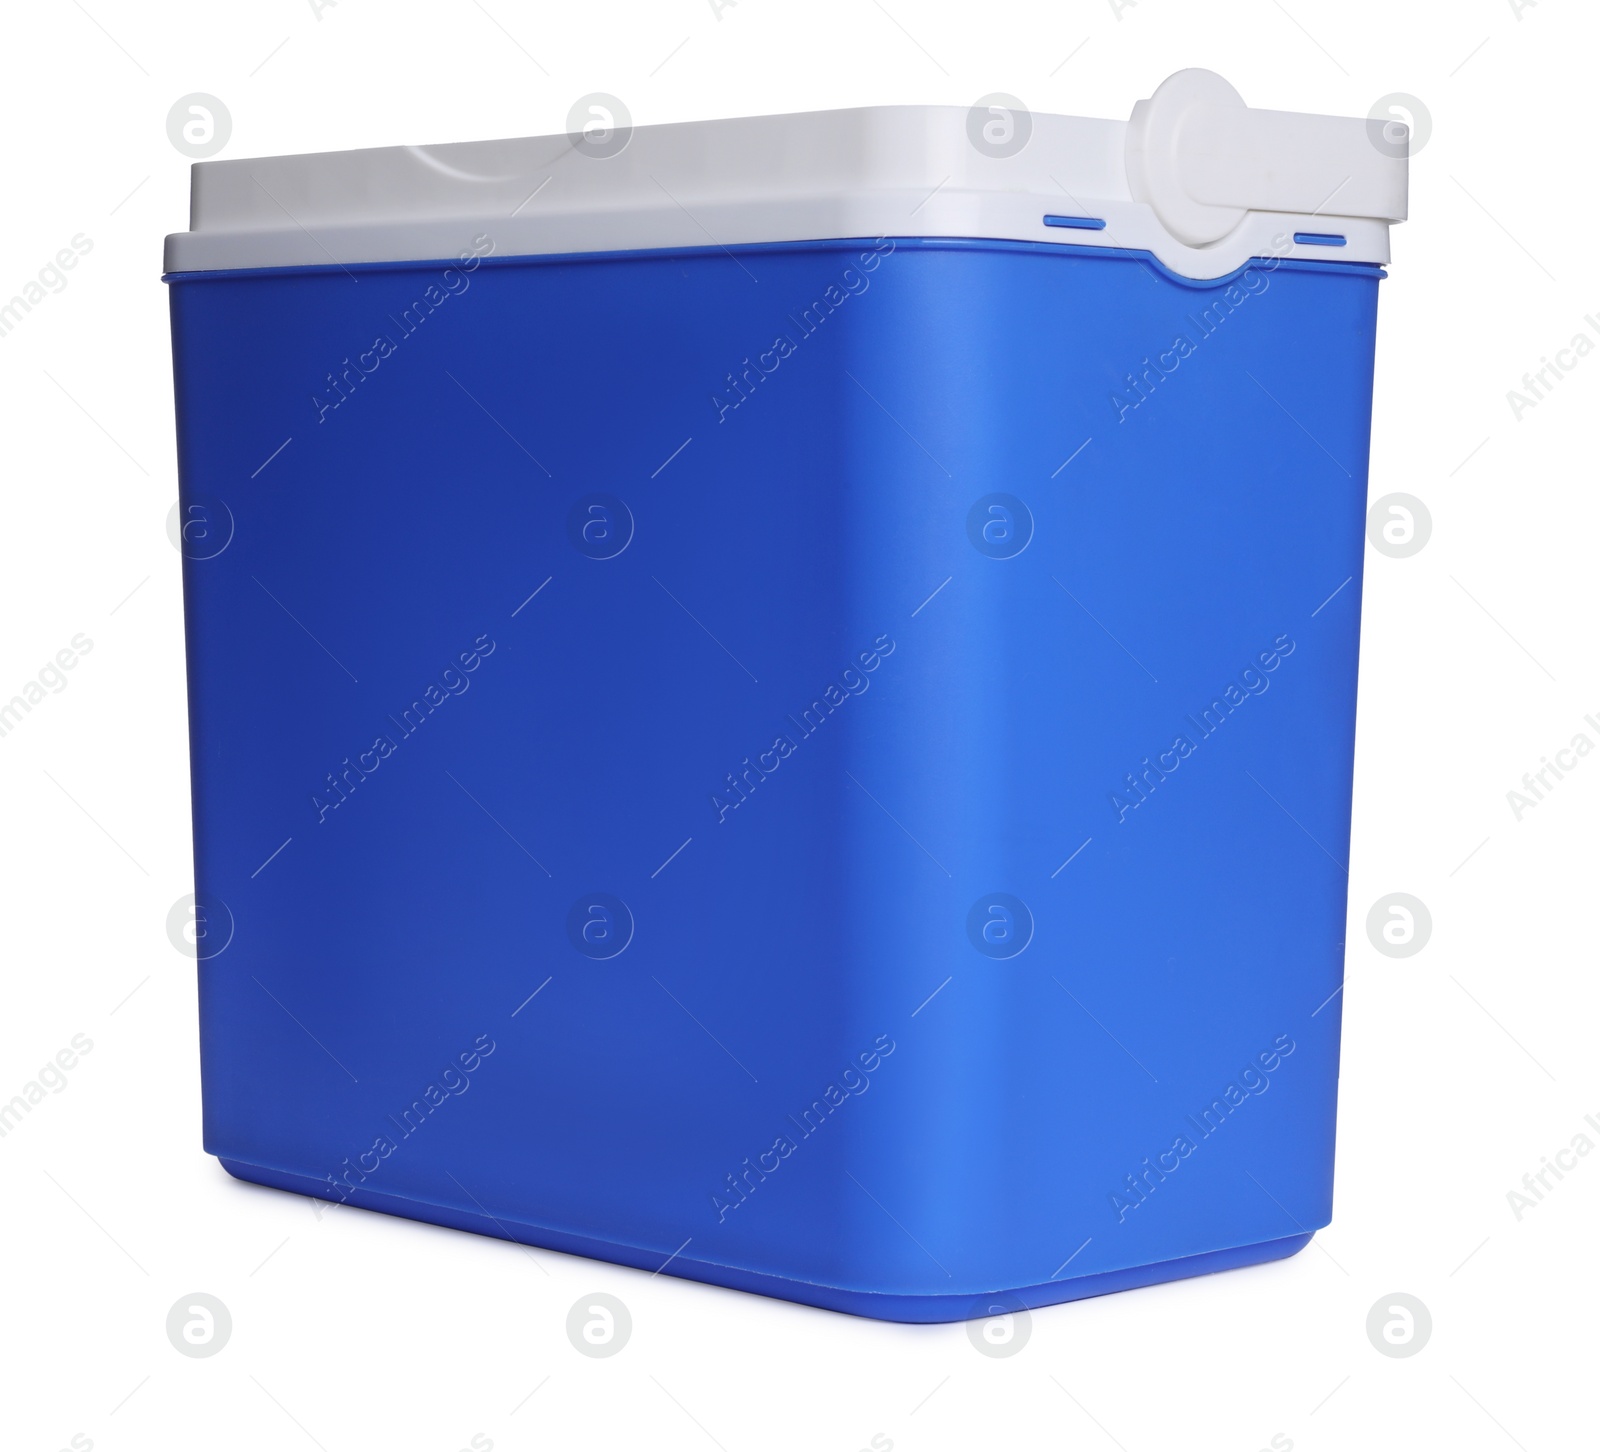 Photo of Blue plastic cool box isolated on white